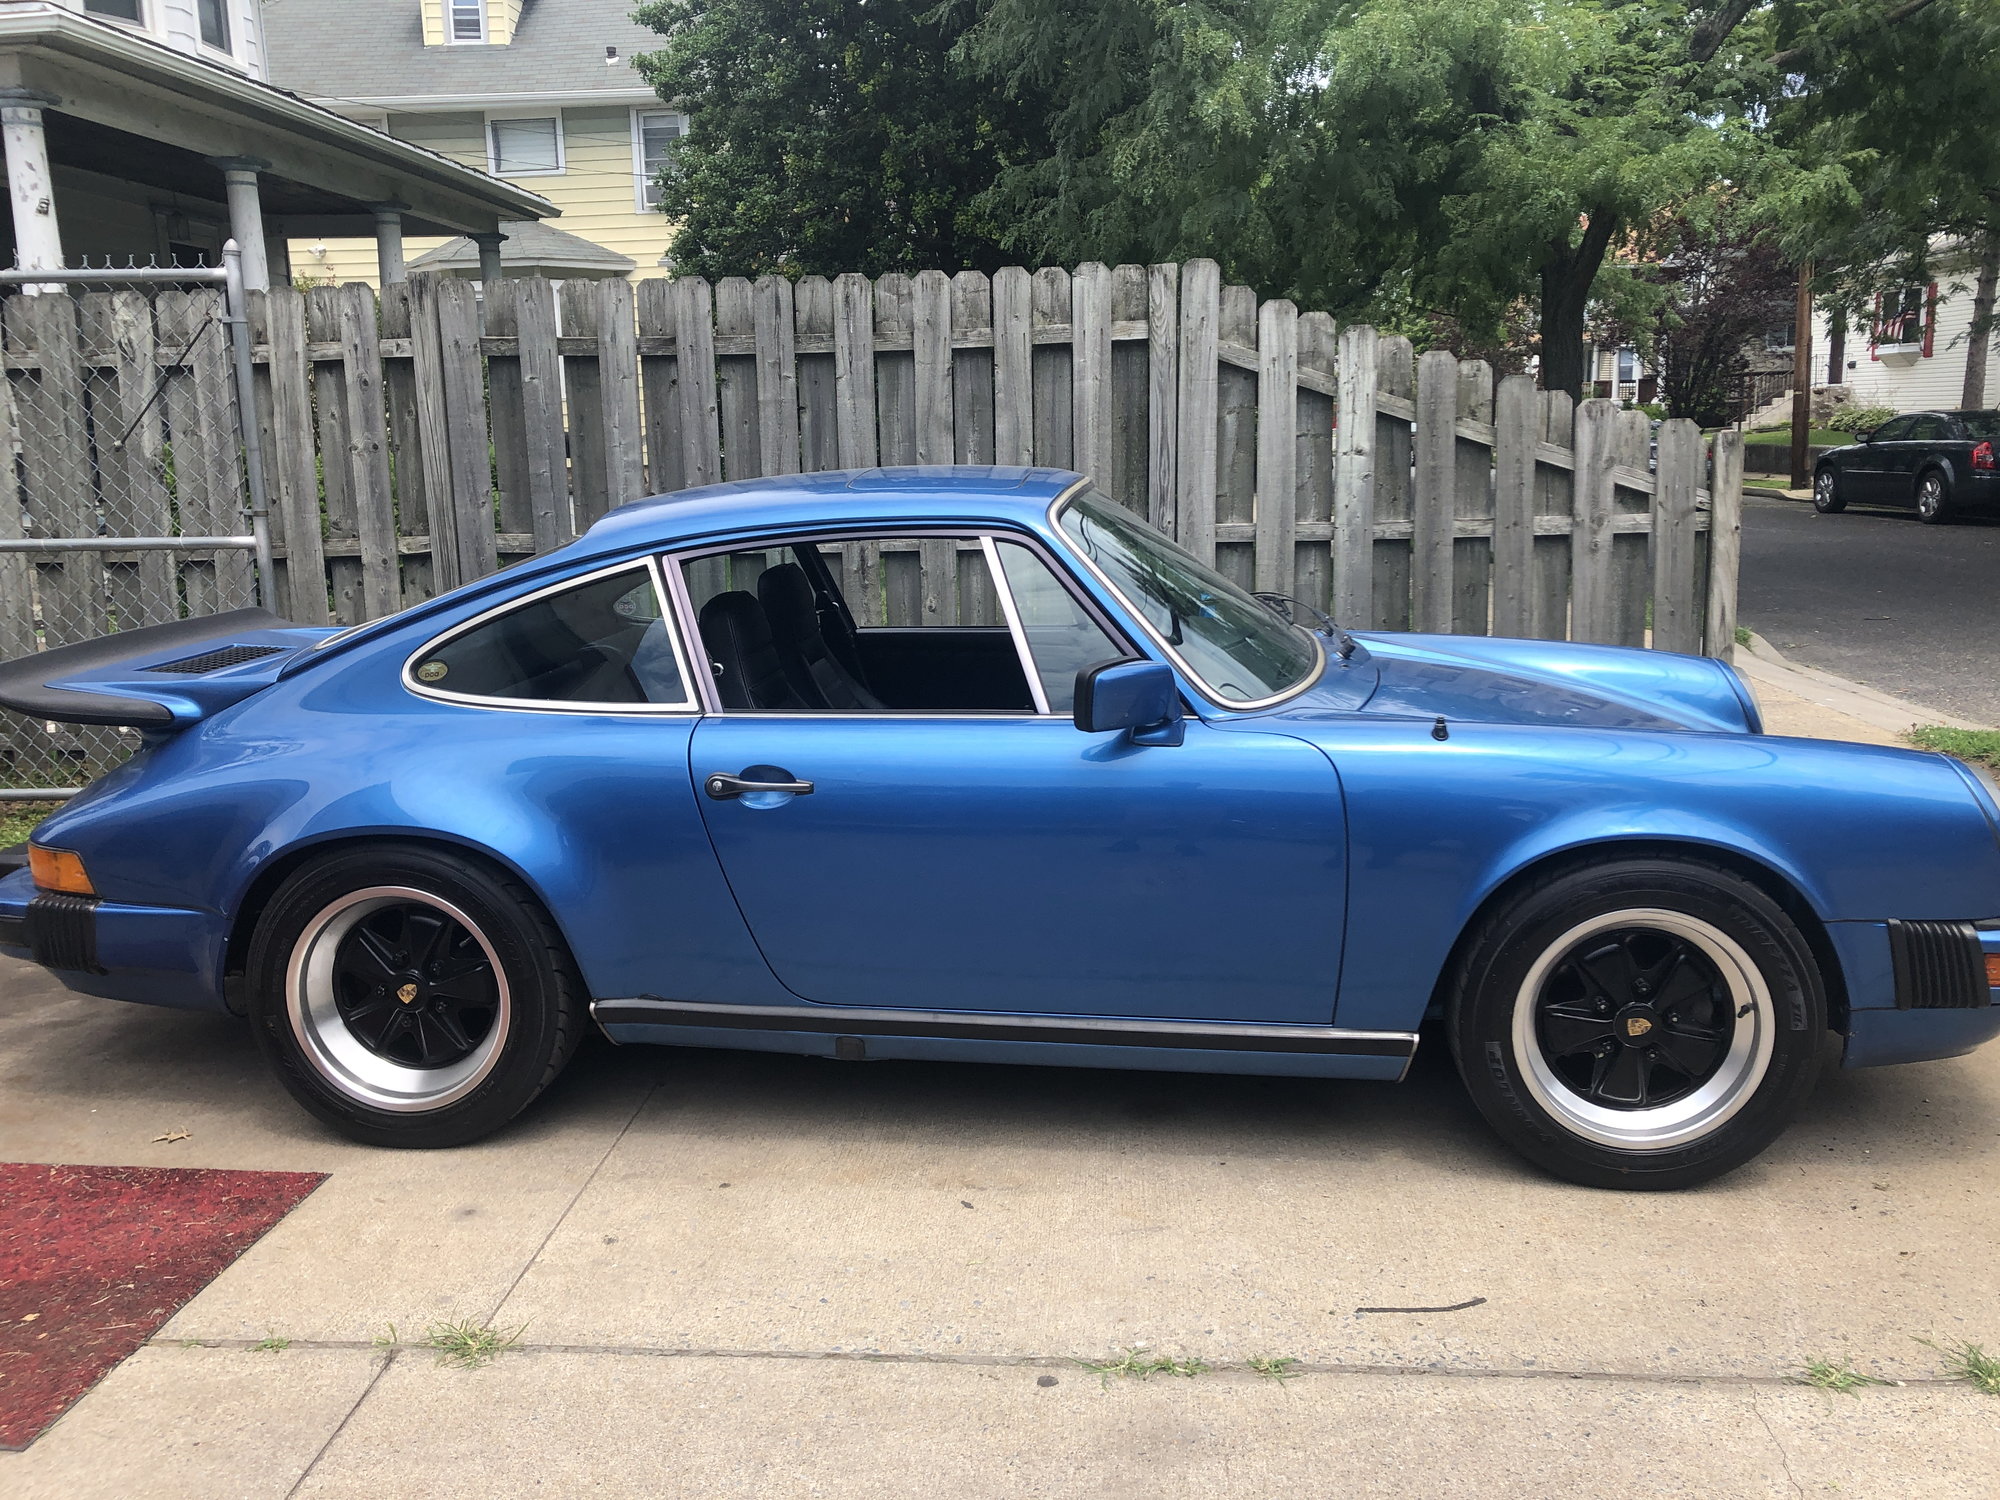 1978 Porsche 911 - 1978 911 SC Minerva Blue - Used - VIN 9118201607 - 108,760 Miles - 6 cyl - 2WD - Manual - Coupe - Blue - Newtown, PA 18940, United States